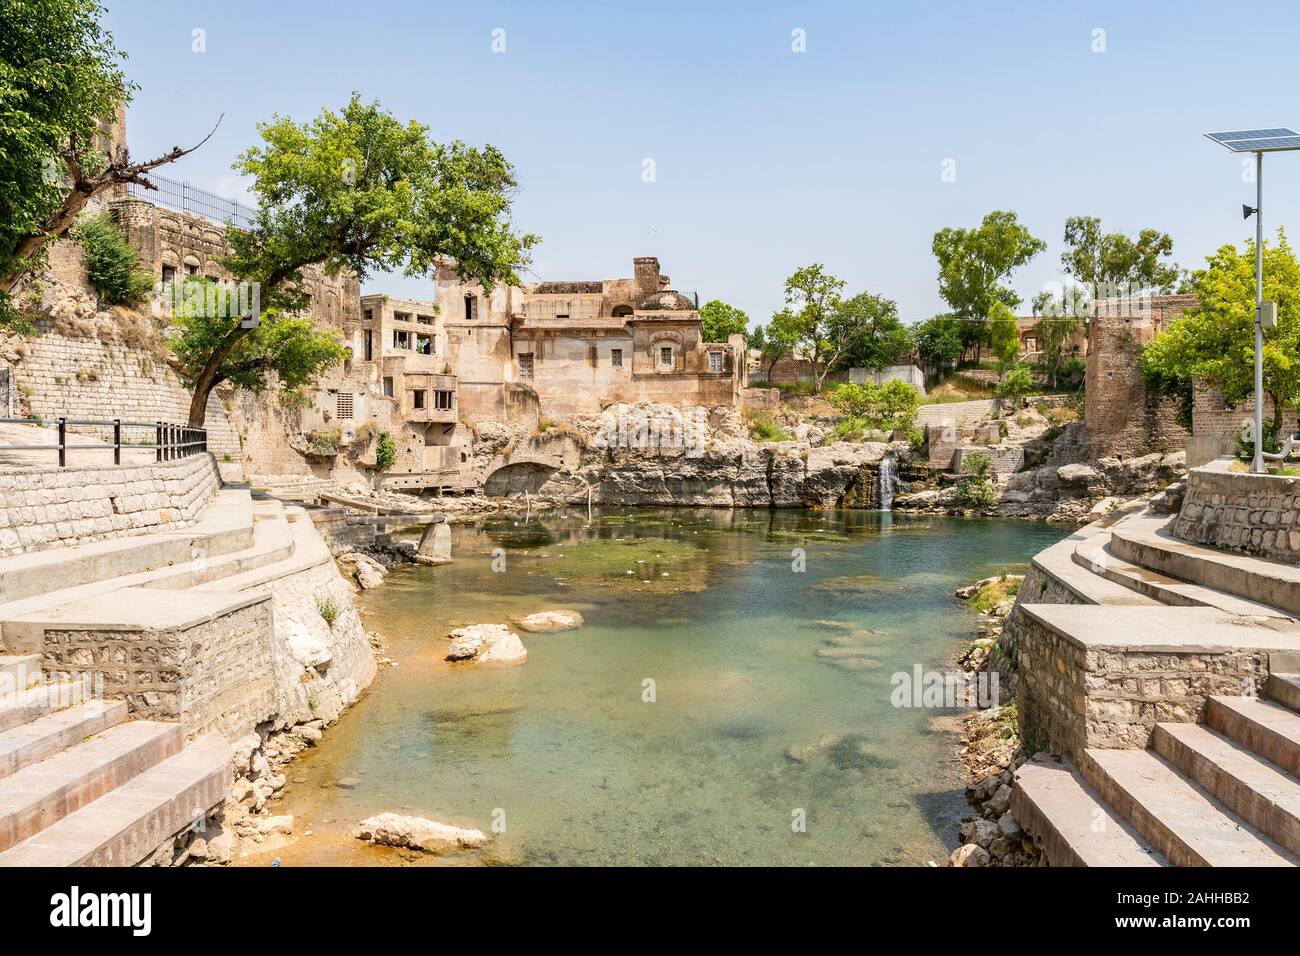 Chakwal Qila Katas Raj Hindu Temples Dedicated to Shiva Picturesque View of the Pond on a Sunny Blue Sky Day Stock Photo